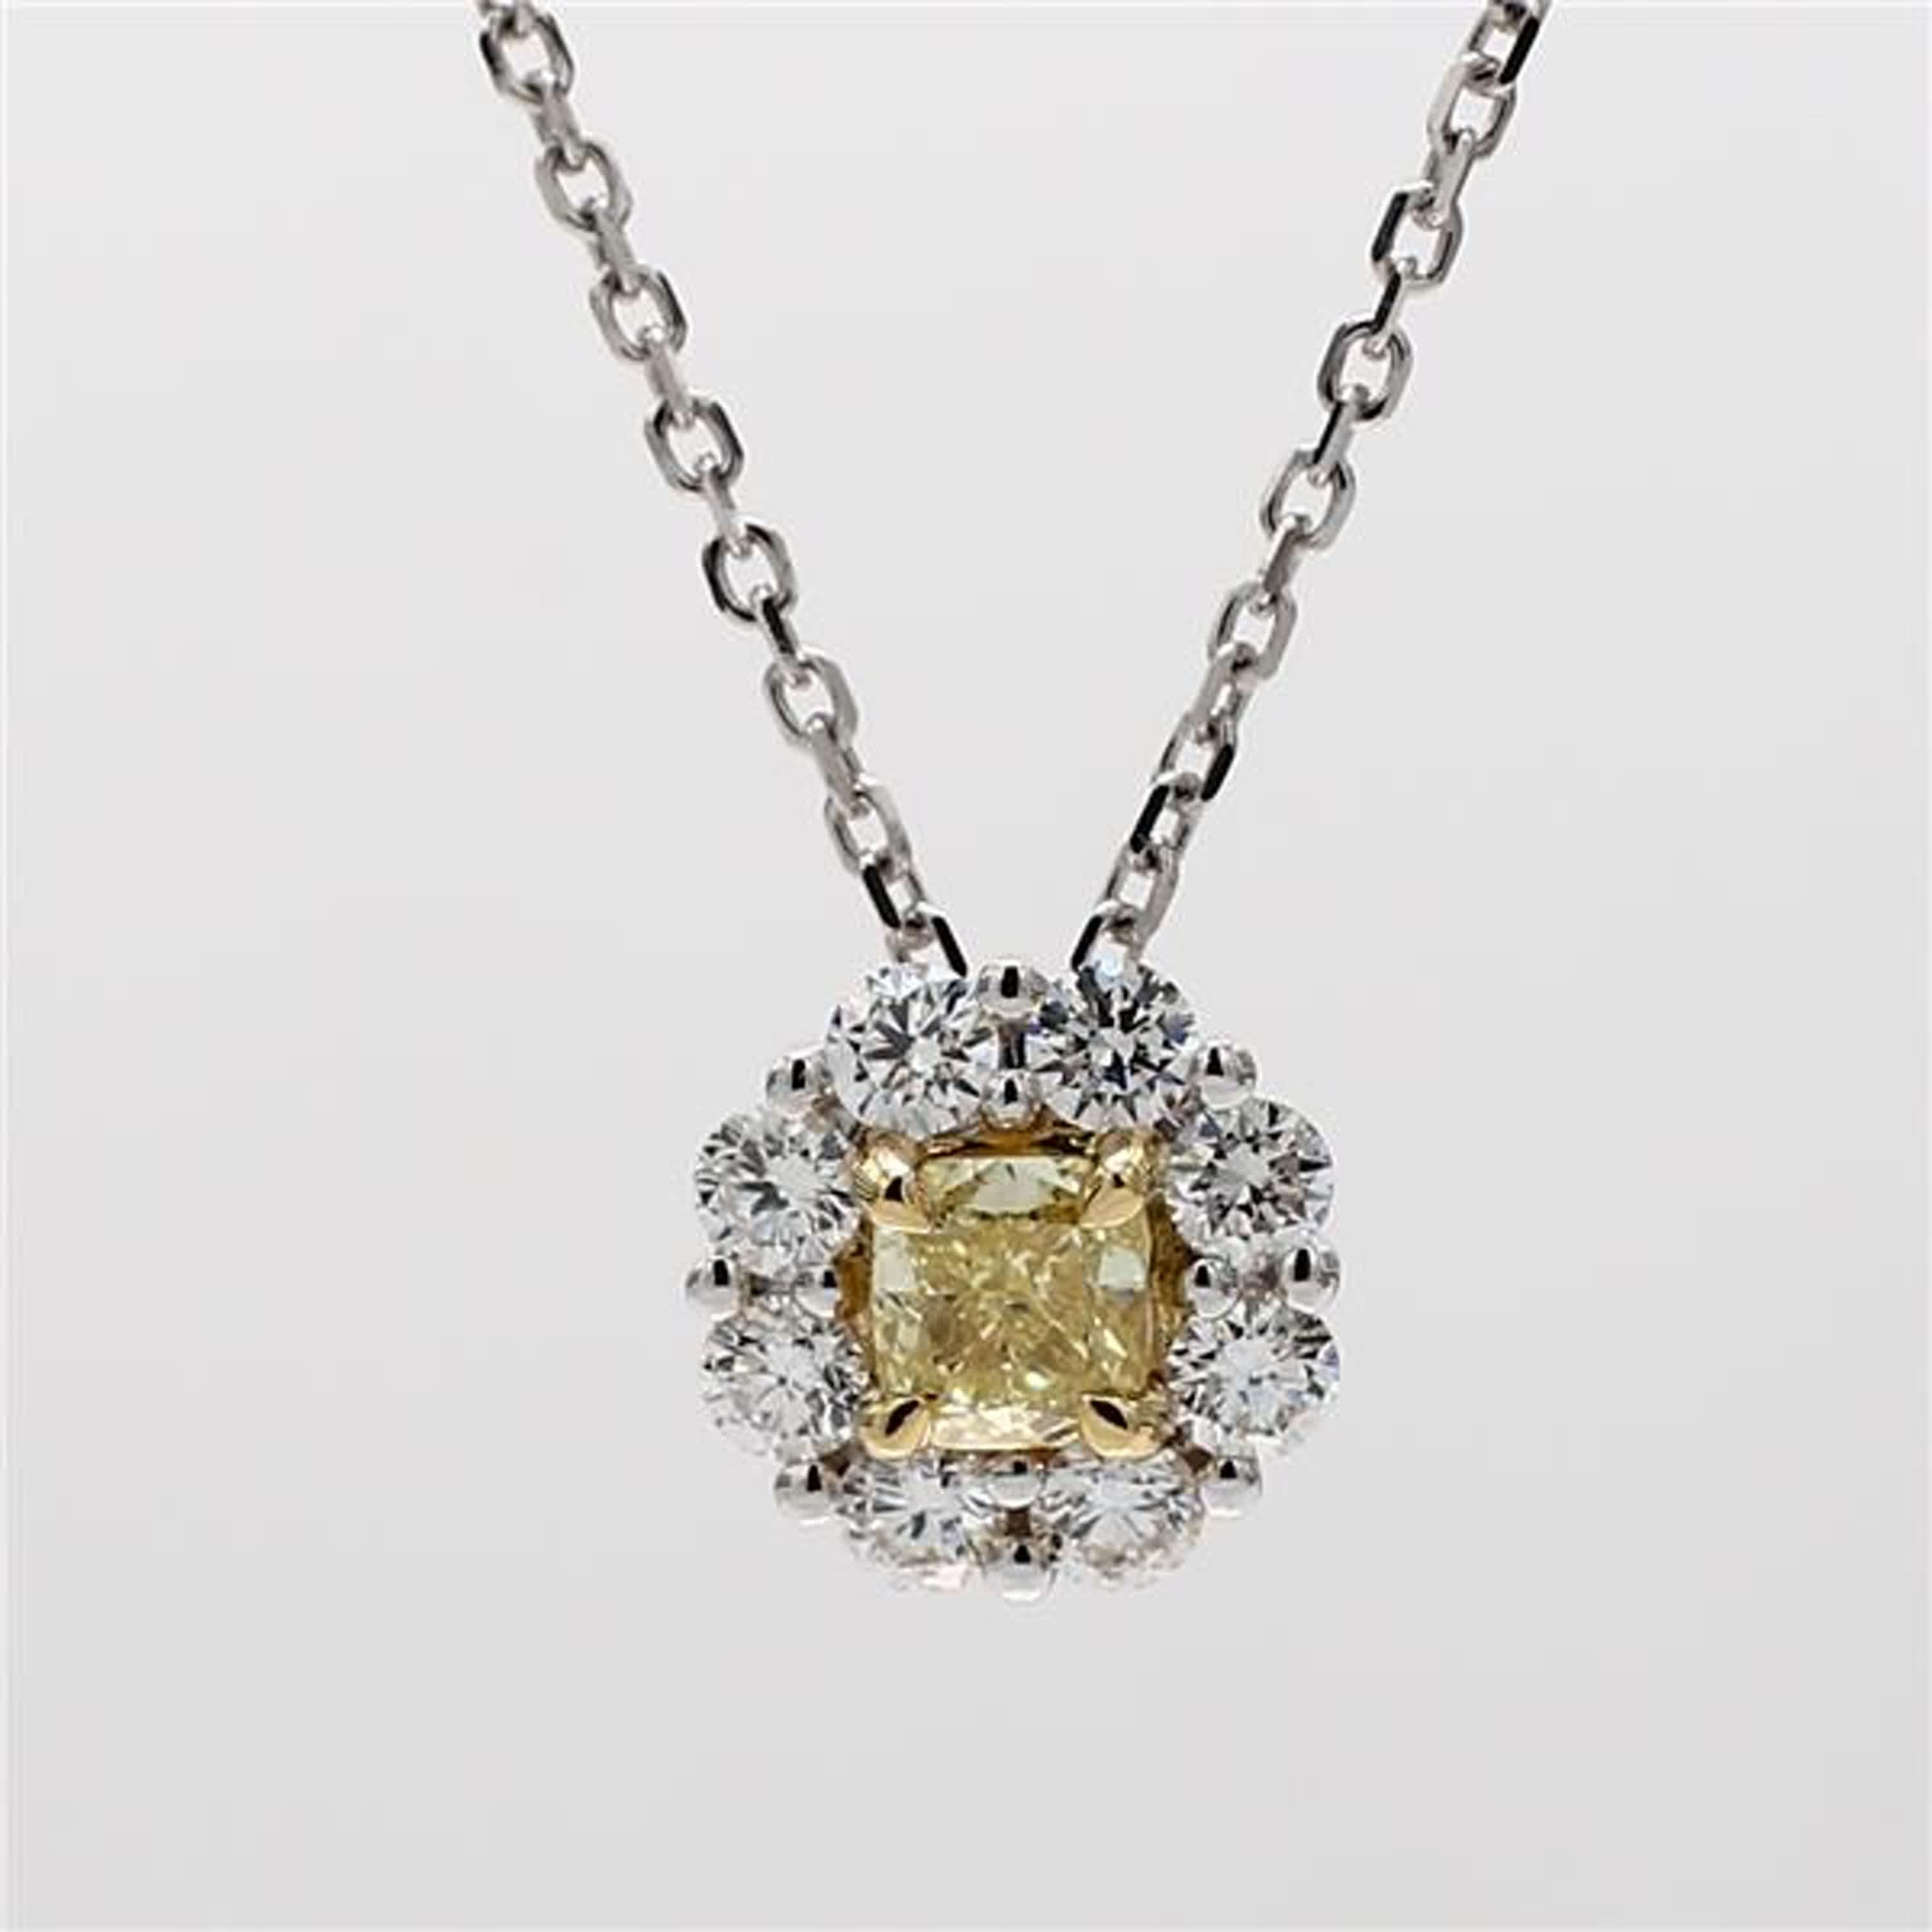 RareGemWorld's intriguing diamond pendant. Mounted in a beautiful 18K Yellow and White Gold setting with a natural cushion cut yellow diamond. The yellow diamond is surrounded by small round natural white diamond melee in a beautiful single halo.